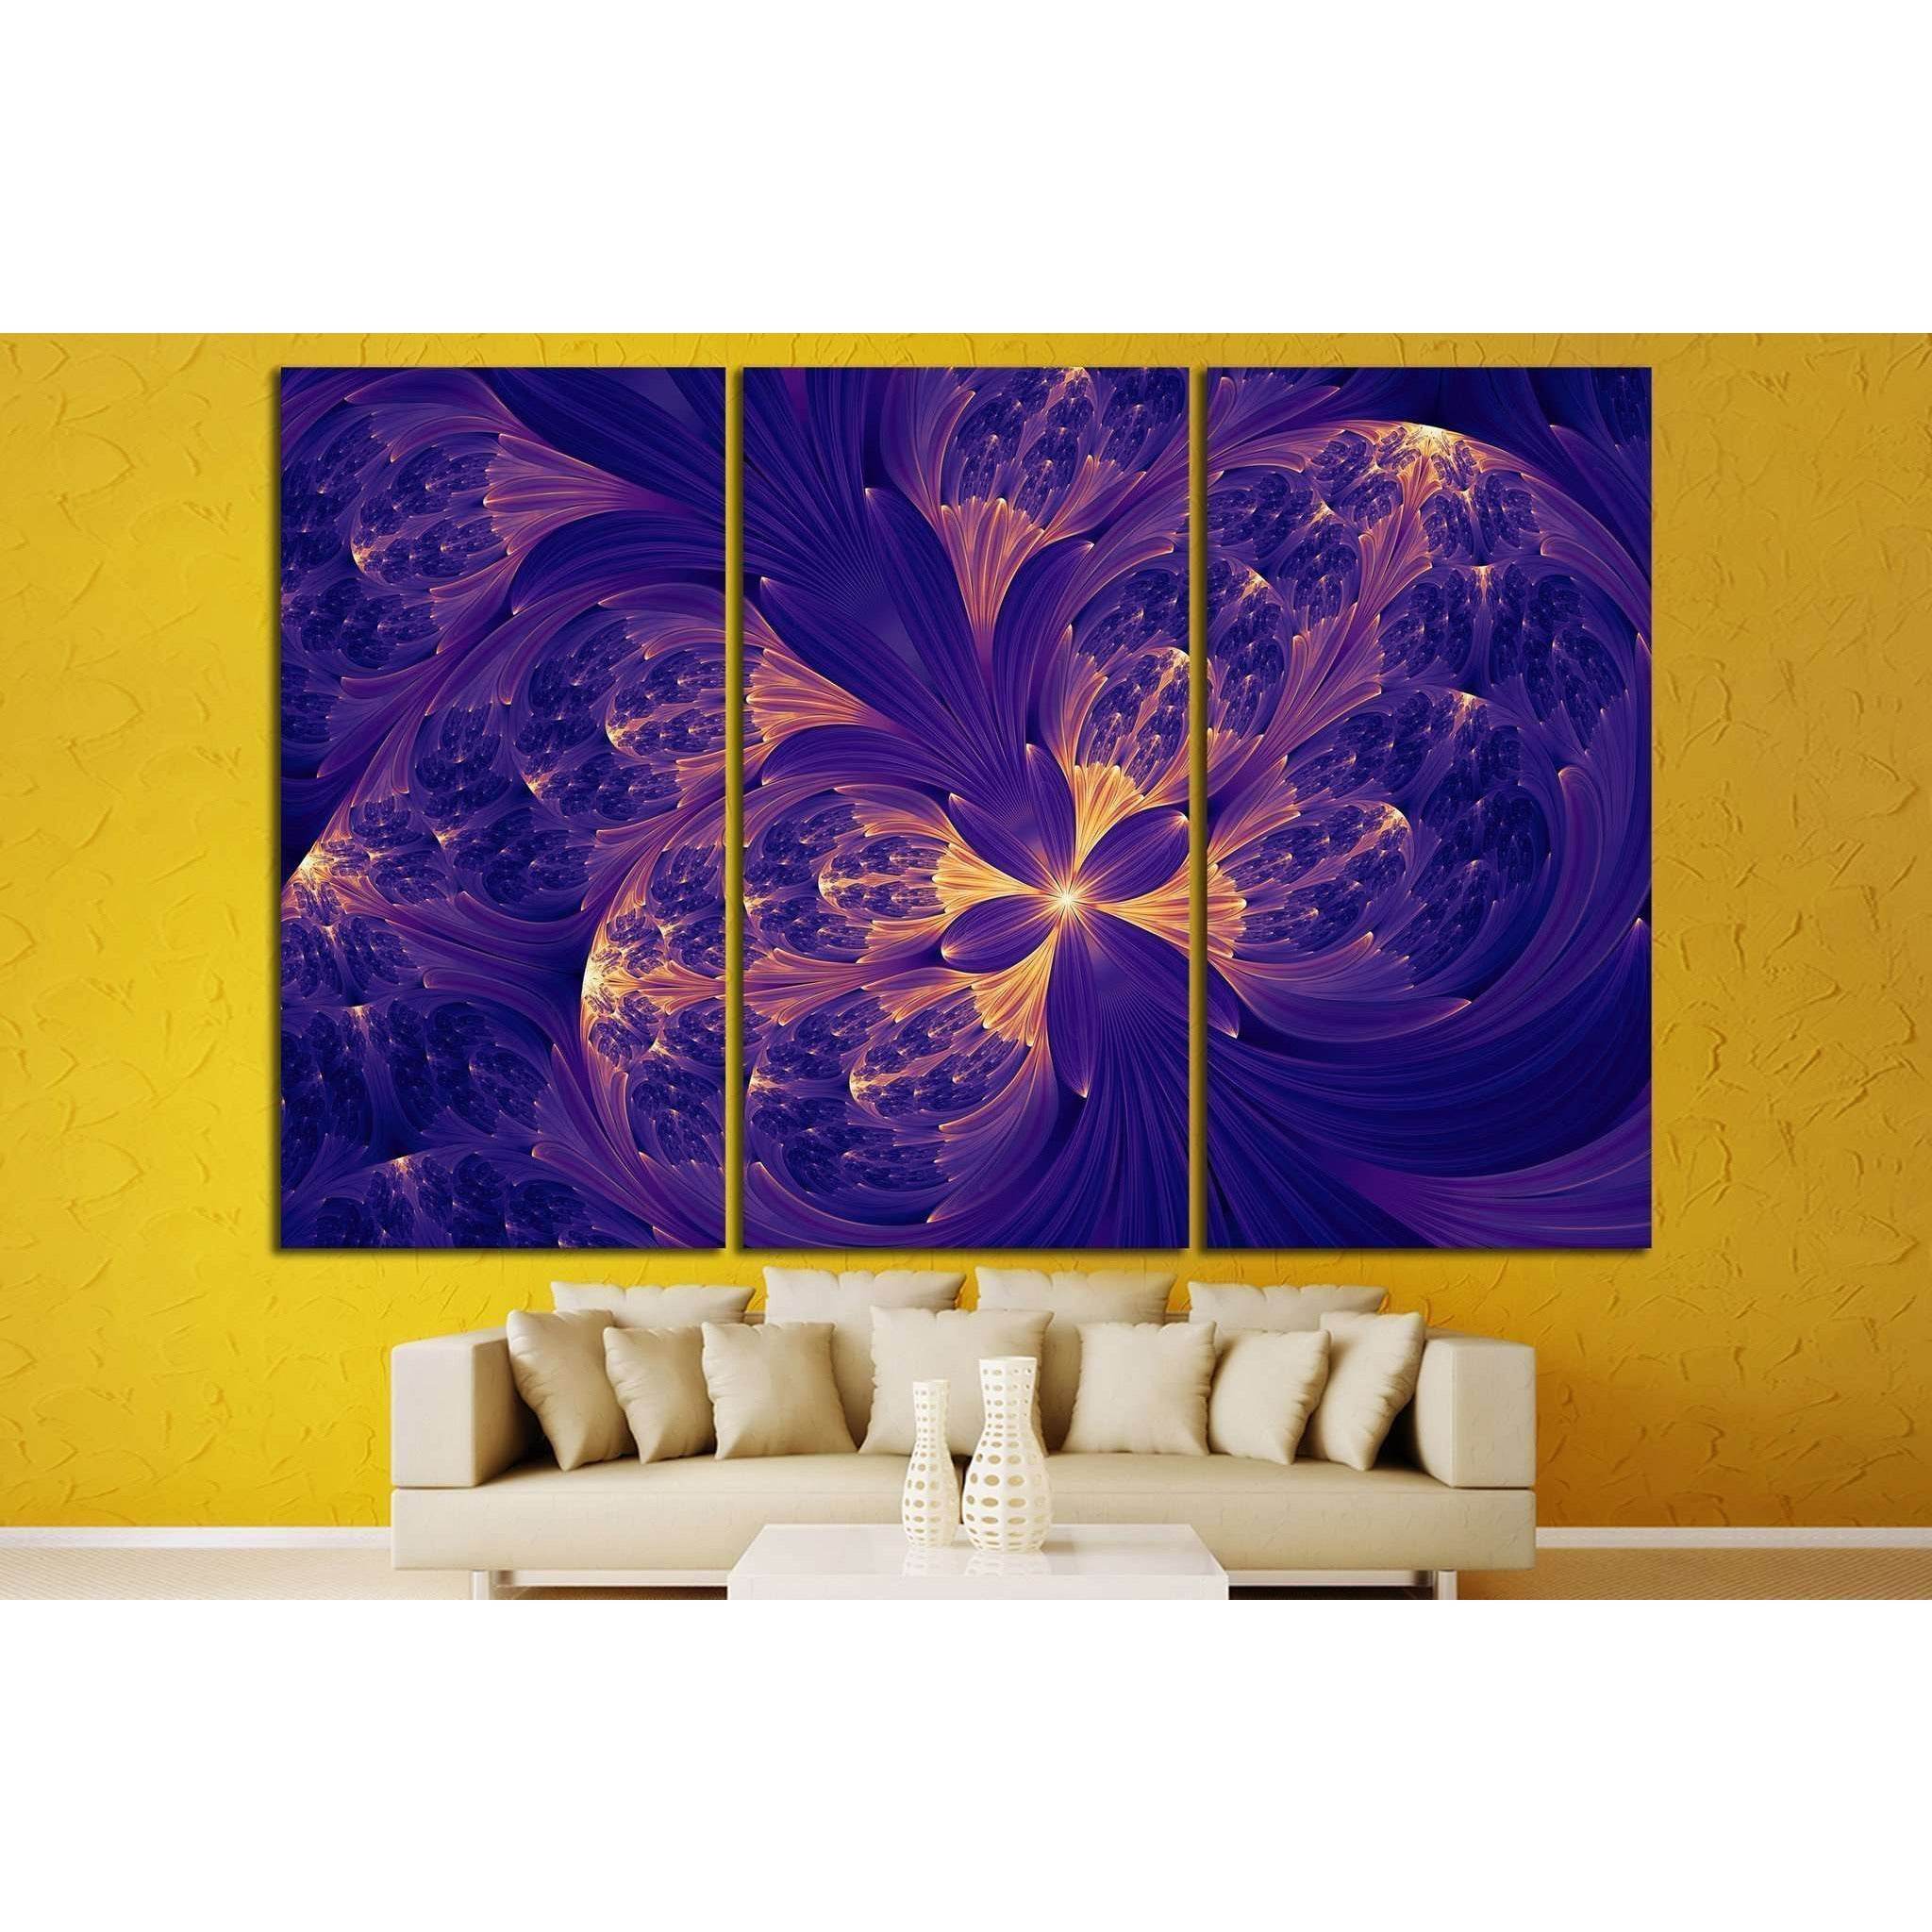 purple abstract flower psychedelic background №1419 Ready to Hang Canvas Print